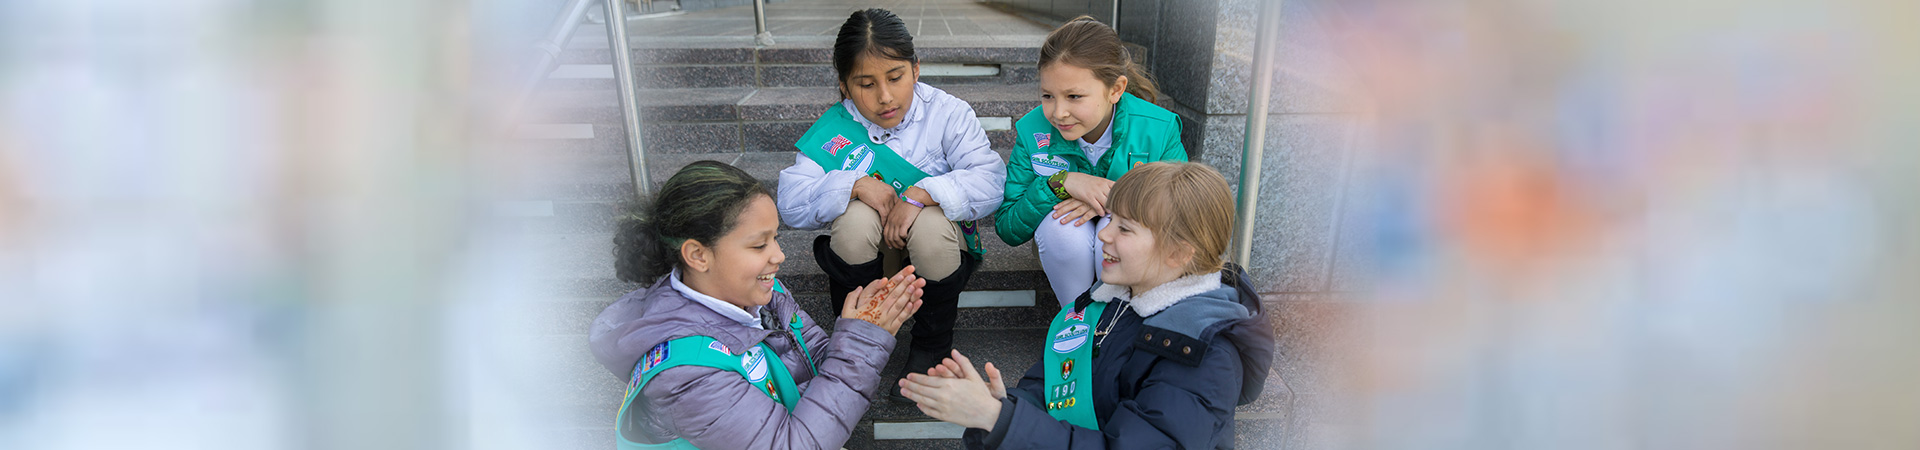  Junior Girl Scouts sitting together on steps outside 